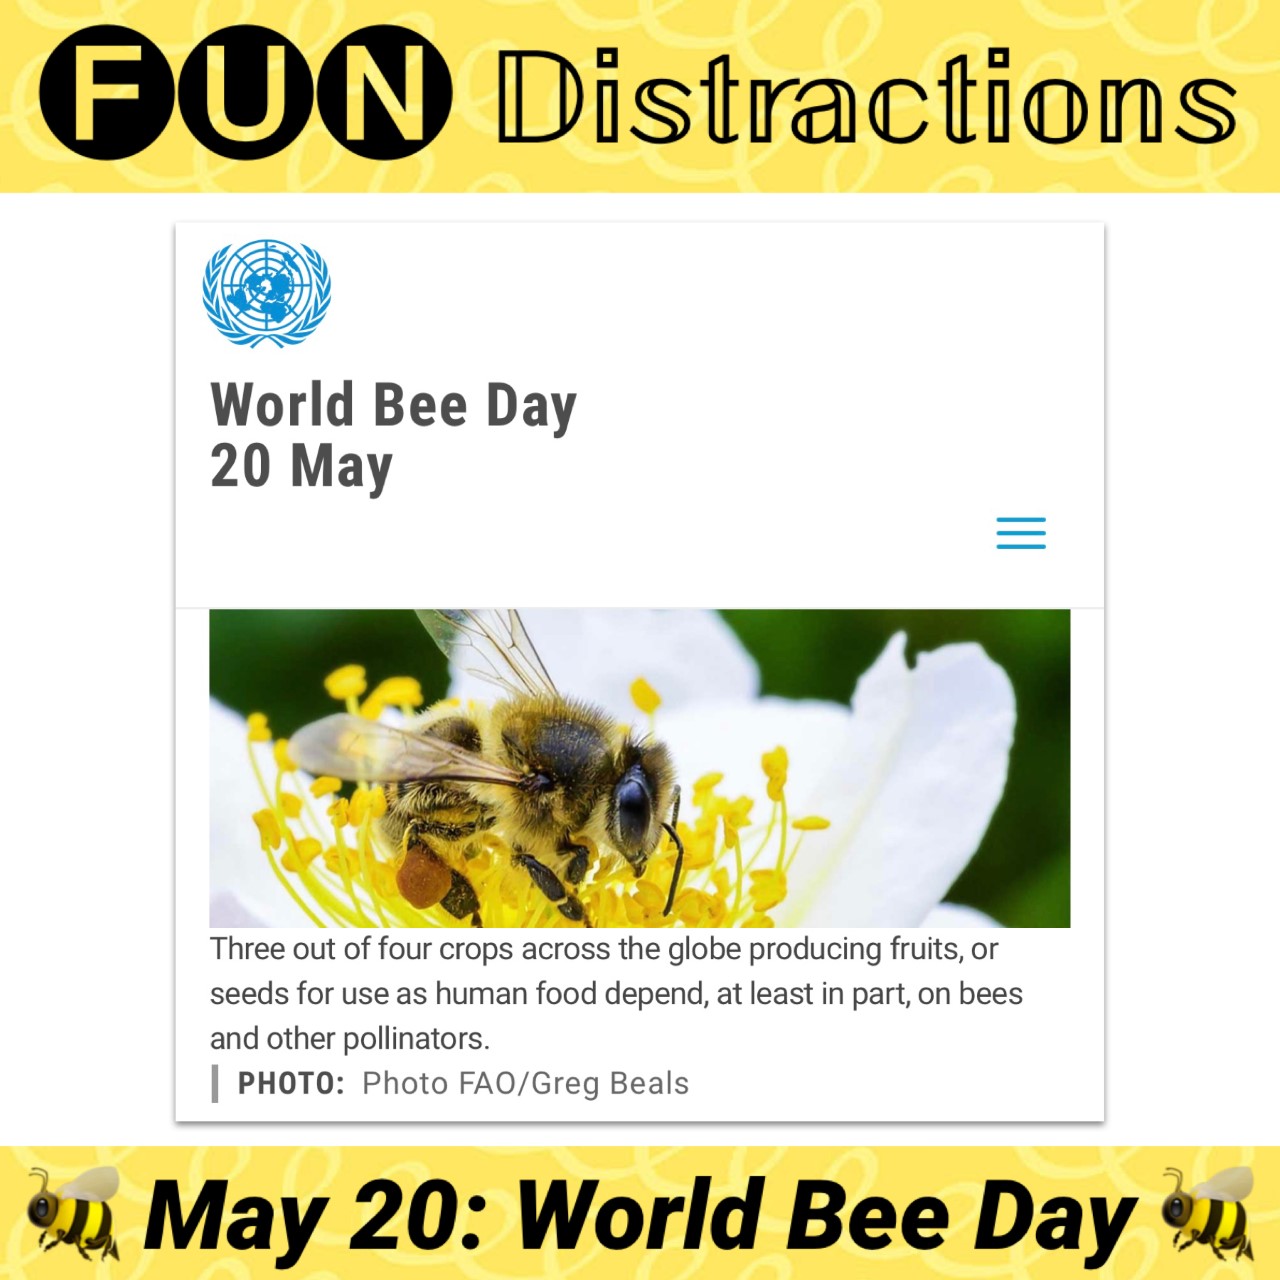 Image of a bee representing World Bee Day May 20th